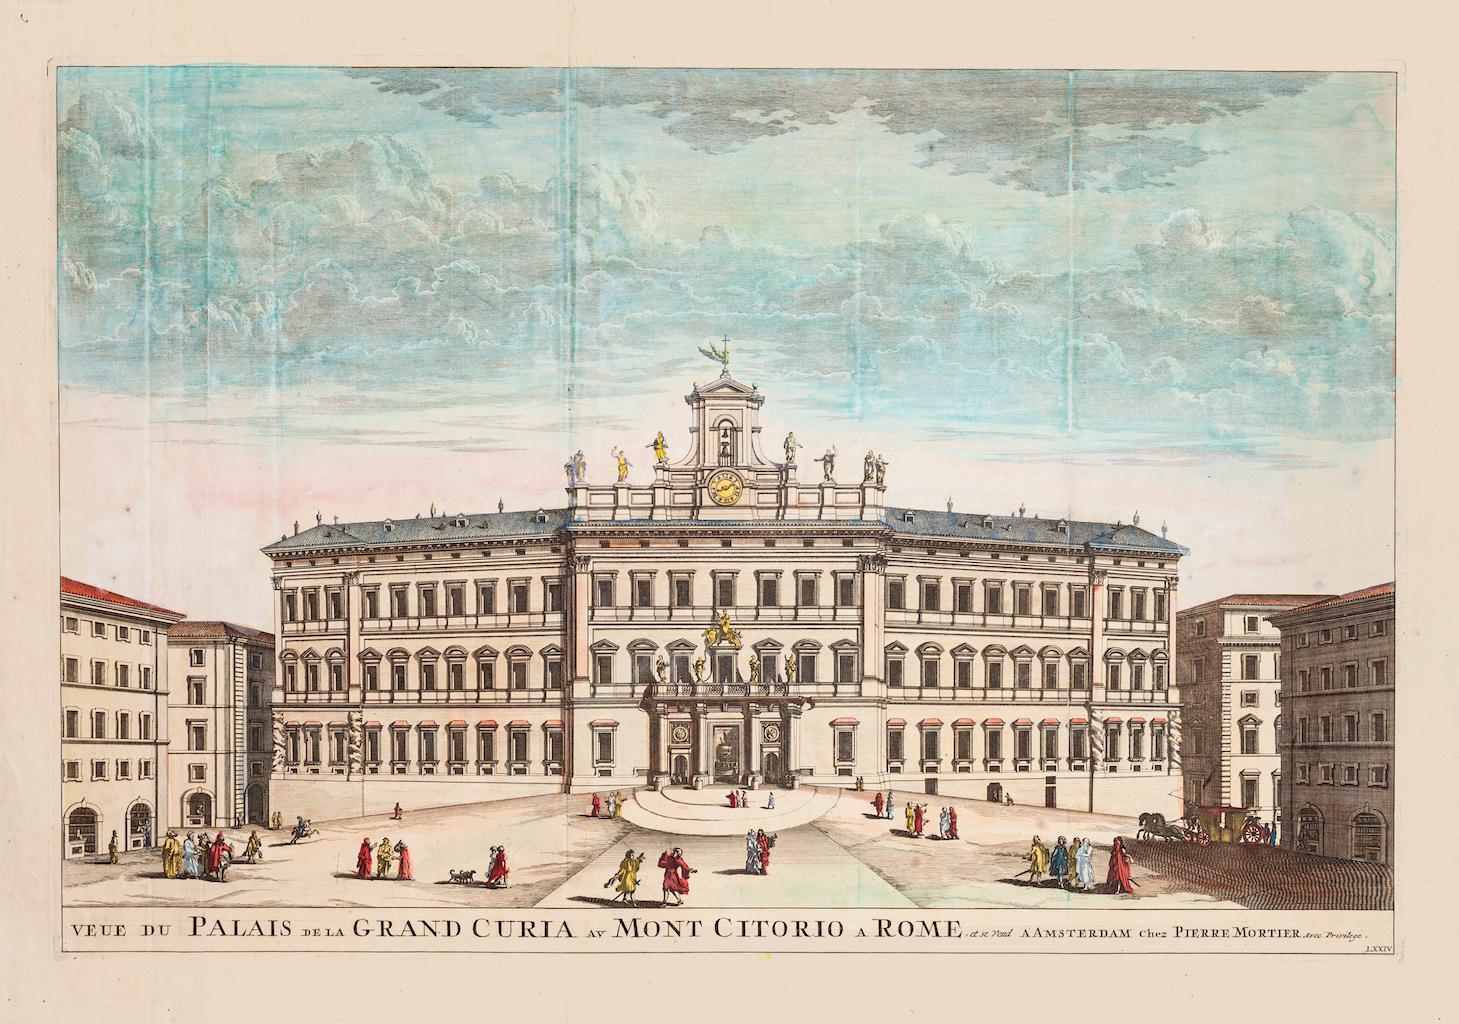 Grande Curia Palace is an original hand-colored print realized by the Dutch artist Pierre Mortier in the second half of the XVII century.

Original etching on paper.

Signed on the plate on the lower right.

Good conditions, and repaired.

Beautiful